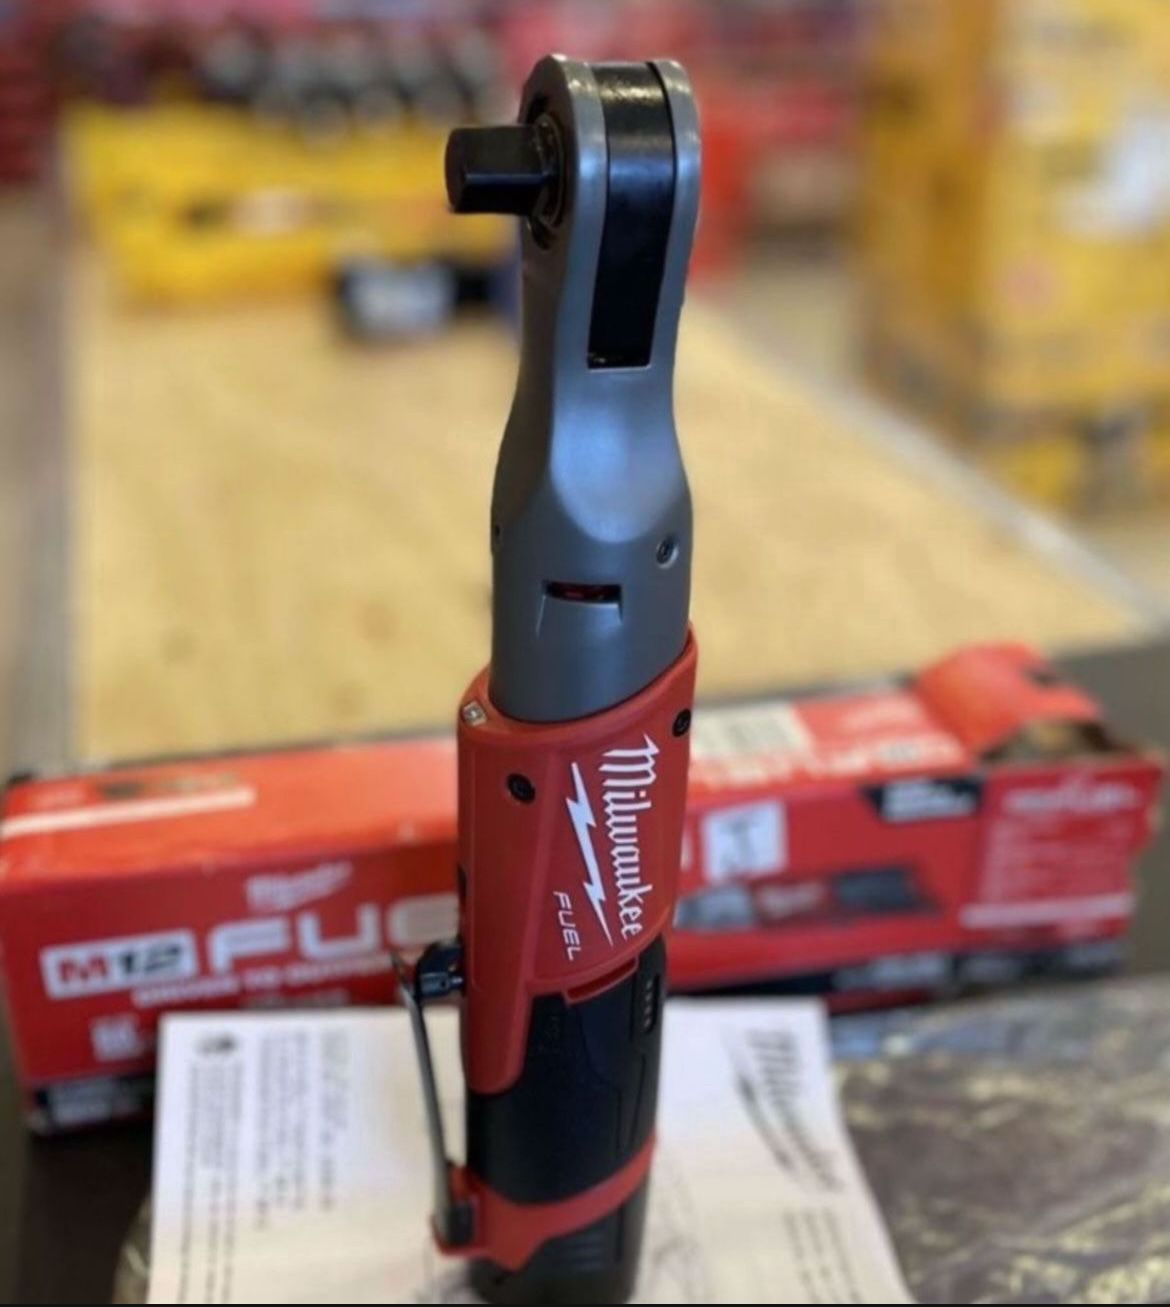 MILWAUKEE M12 FUEL 1/2” RATCHET (TOOL ONLY) 60 FT-LBS TORQUE 2558-20 for  Sale in North Las Vegas, NV OfferUp